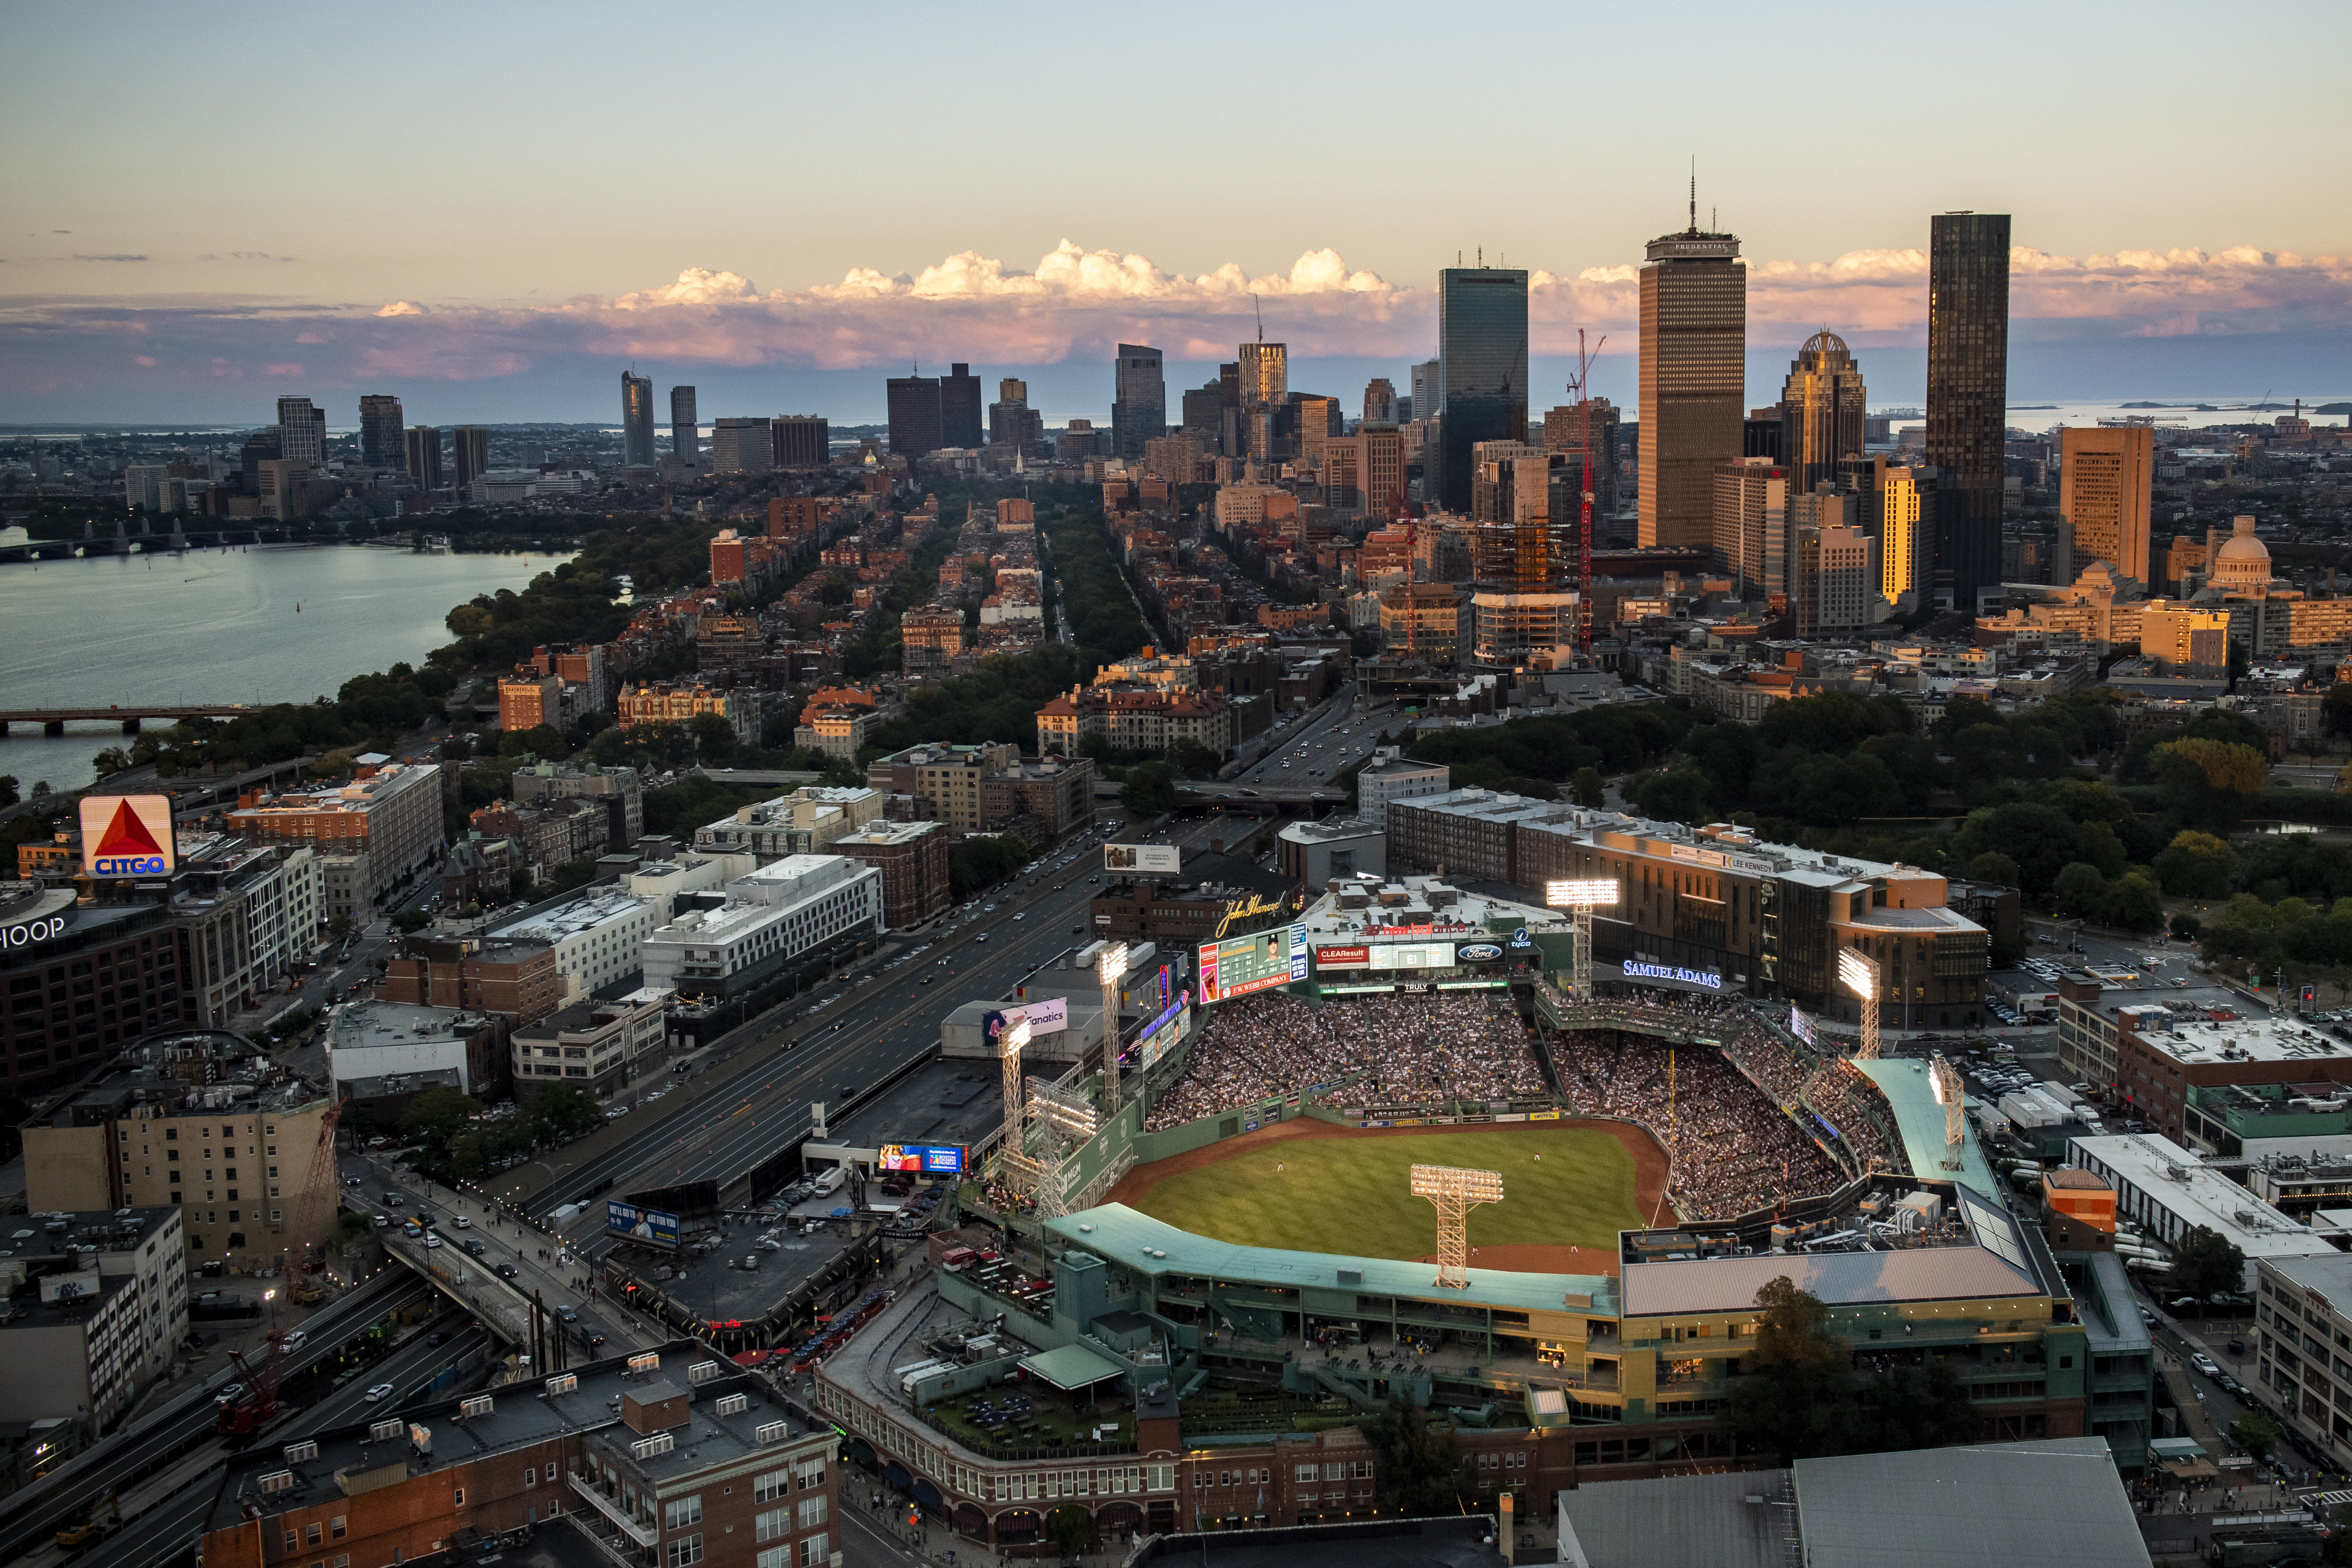 An aerial view of Boston showing landmarks like Fenway Park and the Citgo sign.